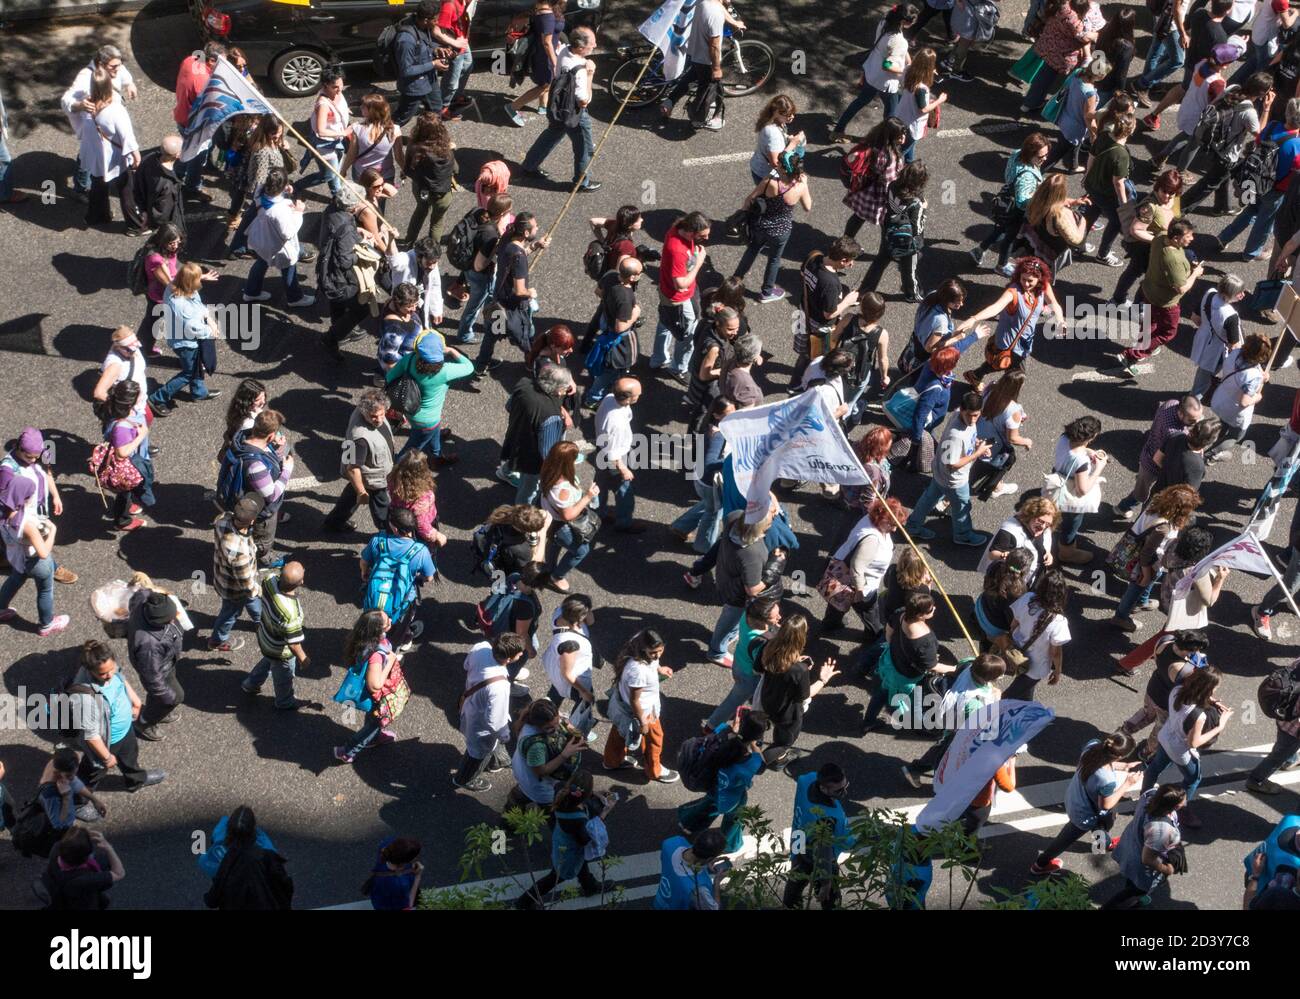 Demonstrators marching in Buenos Aires, Argentina Stock Photo